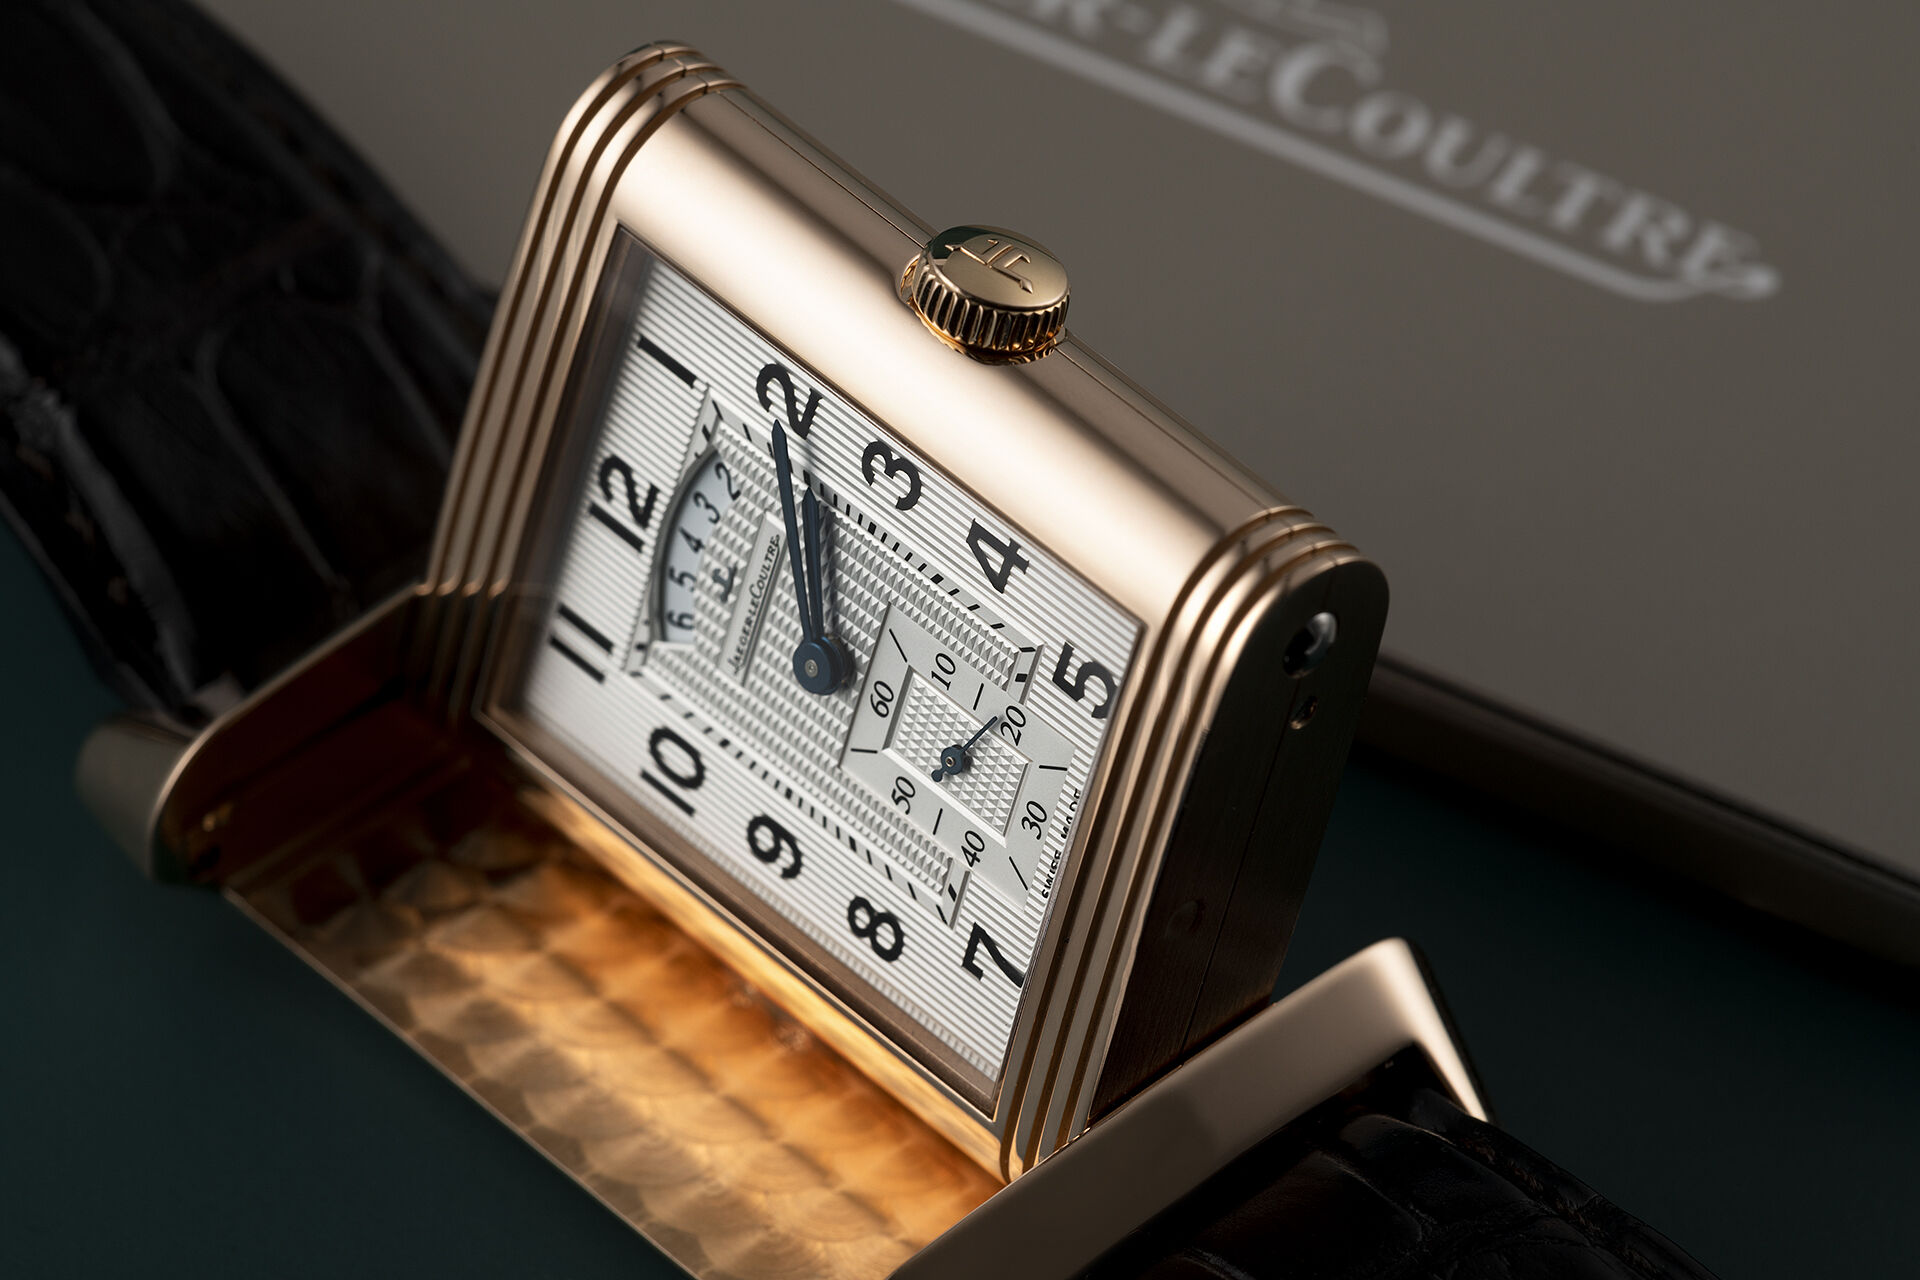 ref 274.2.85 | Limited Edition of 500  | Jaeger-leCoultre Grande Reverso